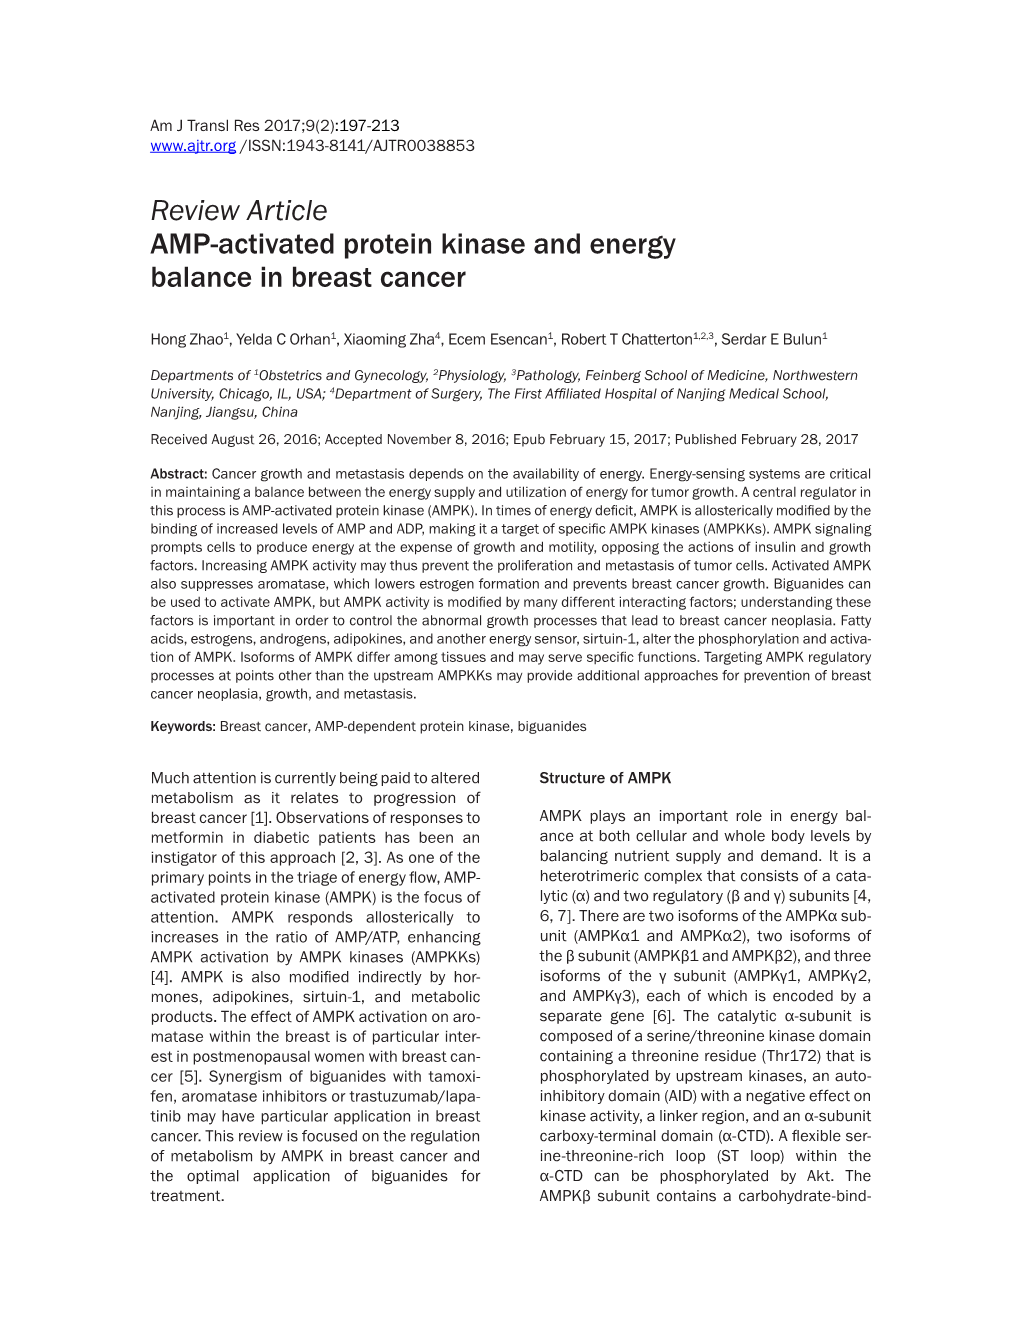 Review Article AMP-Activated Protein Kinase and Energy Balance in Breast Cancer